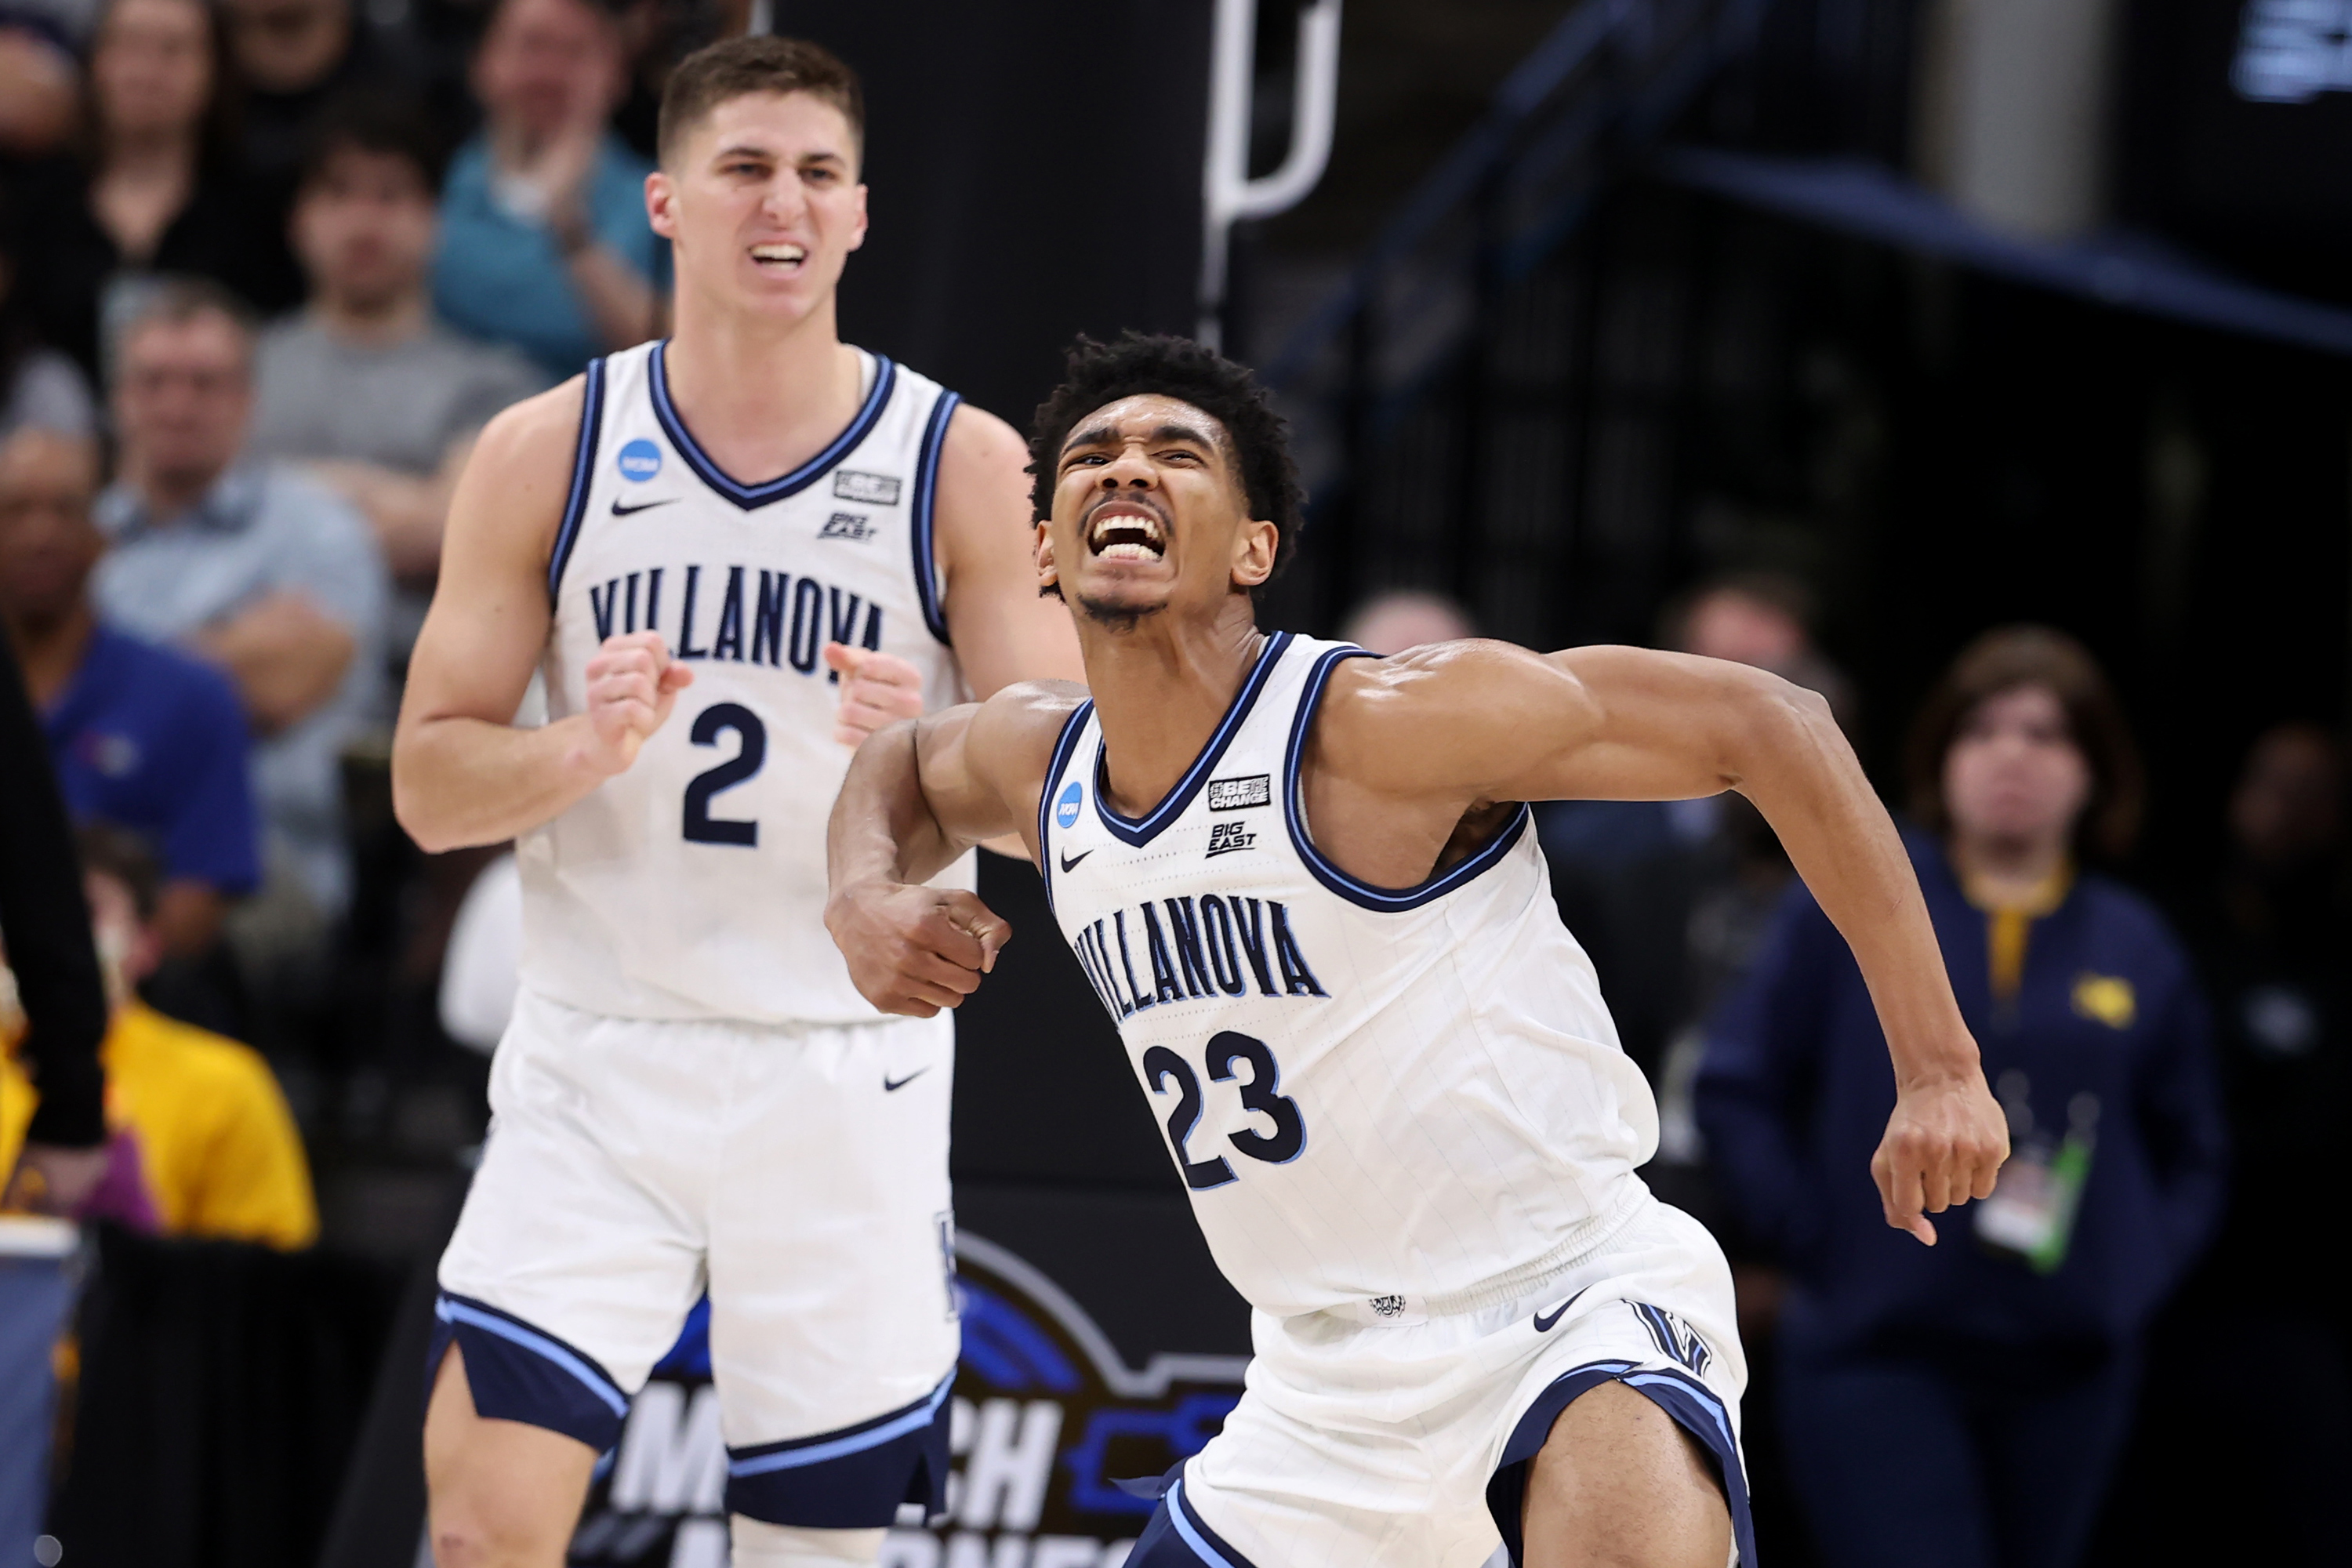 Villanova-Houston Start time, channel, how to watch and stream March Madness game